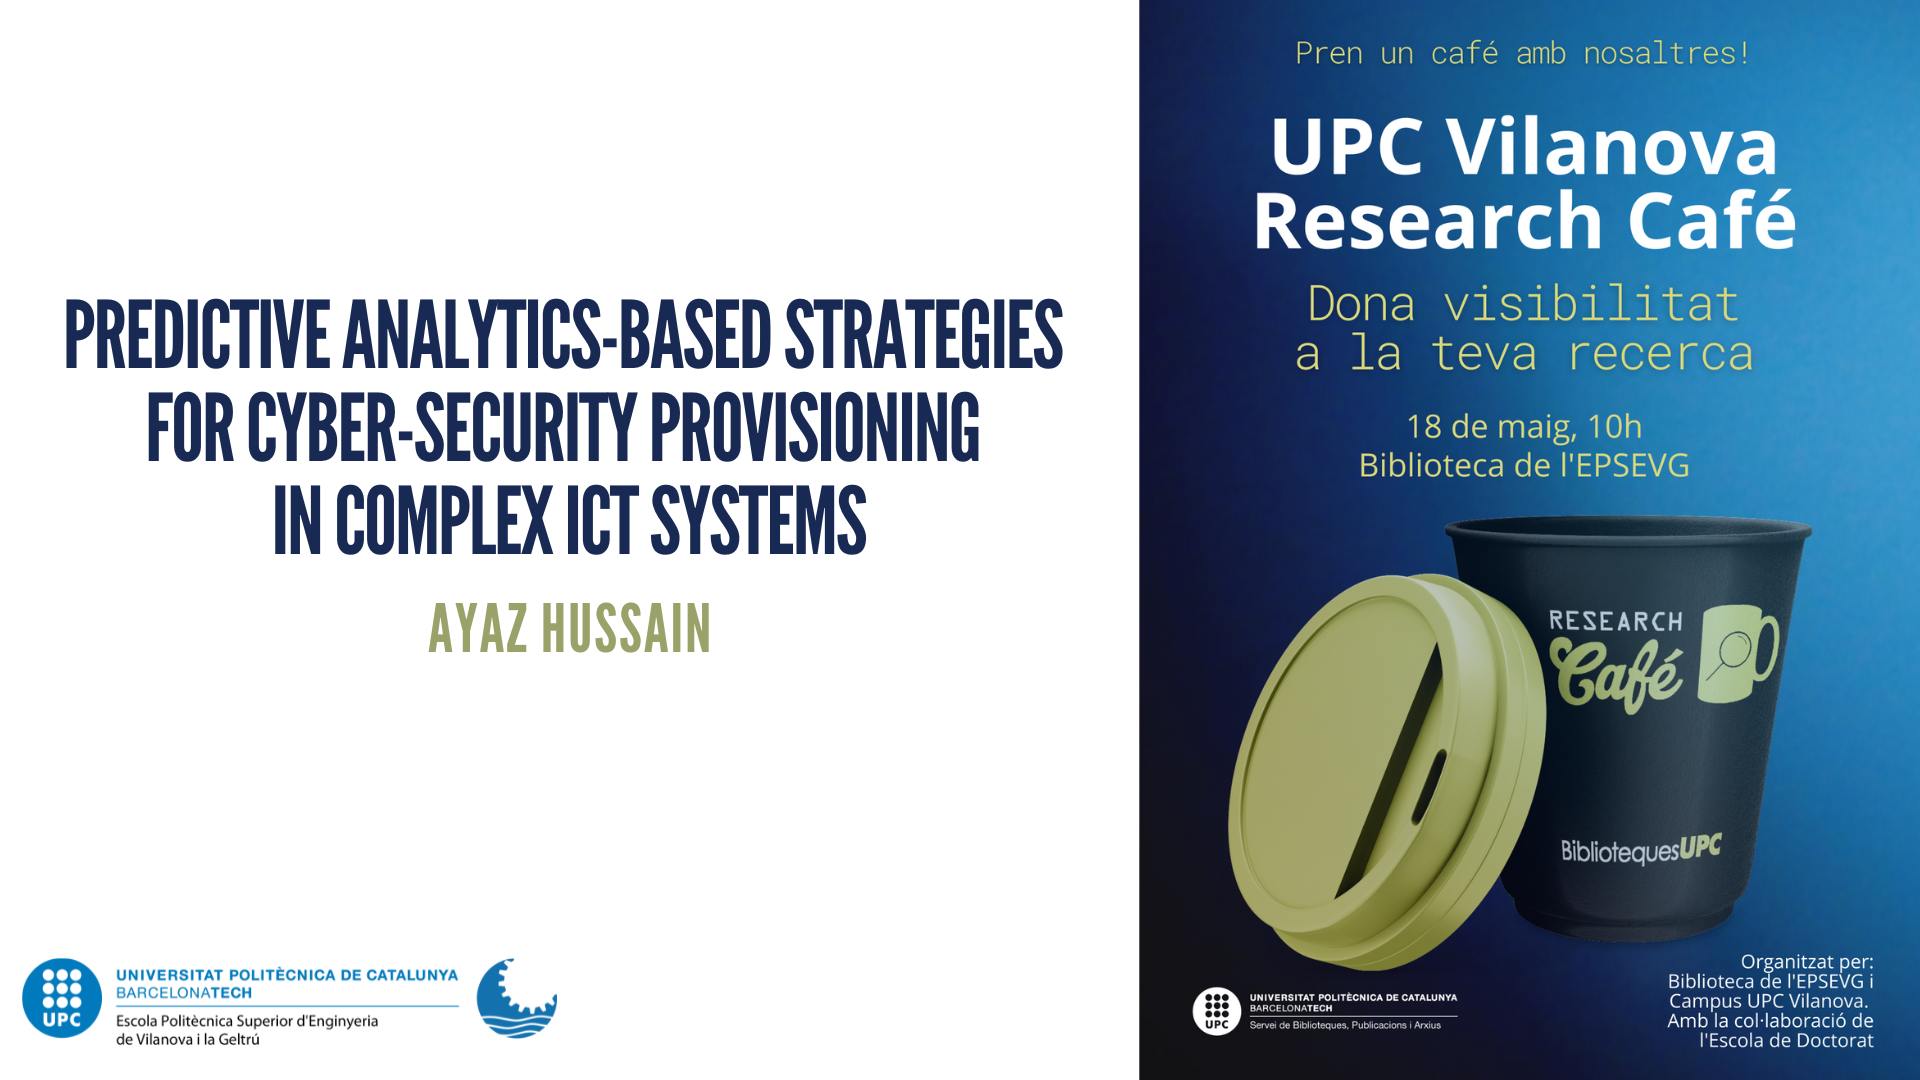 Predictive analytics-based strategies for cyber-security provisioning in complex ICT systems